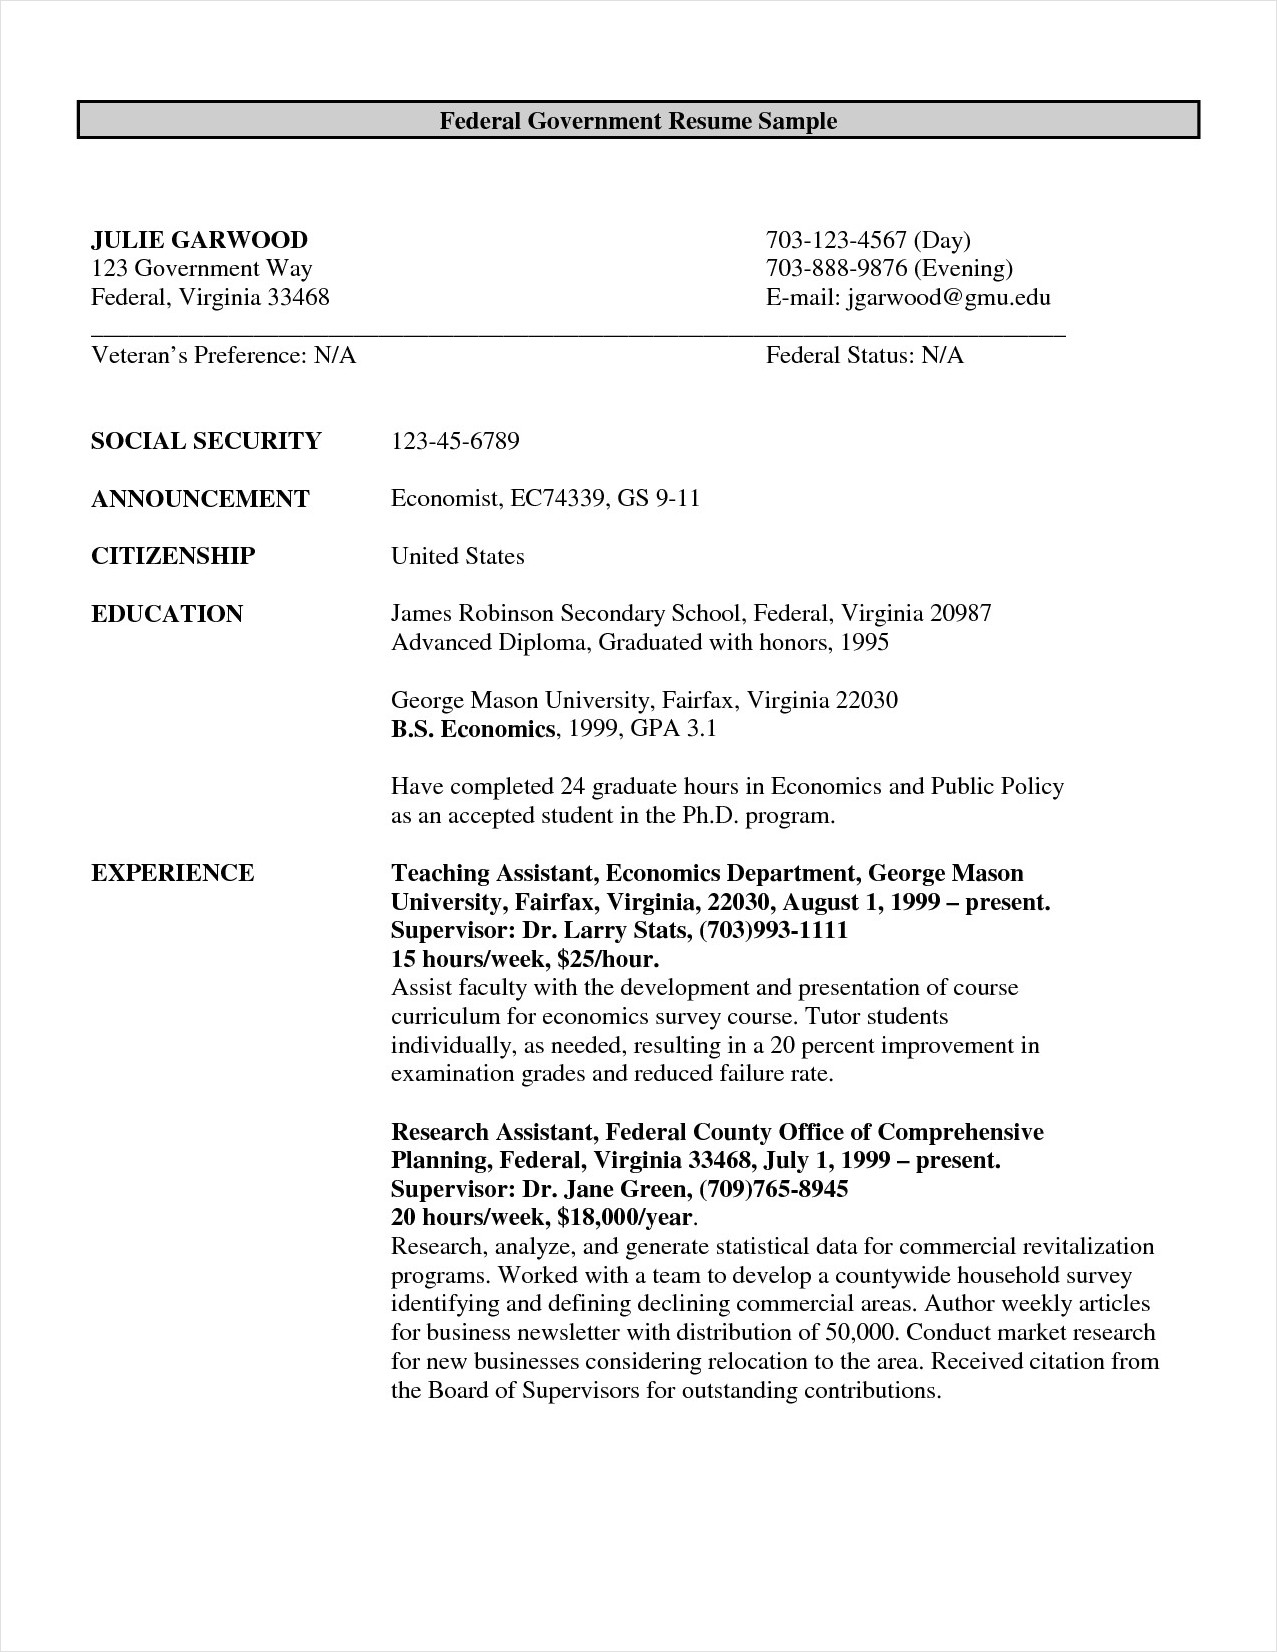 example of resume template for government job